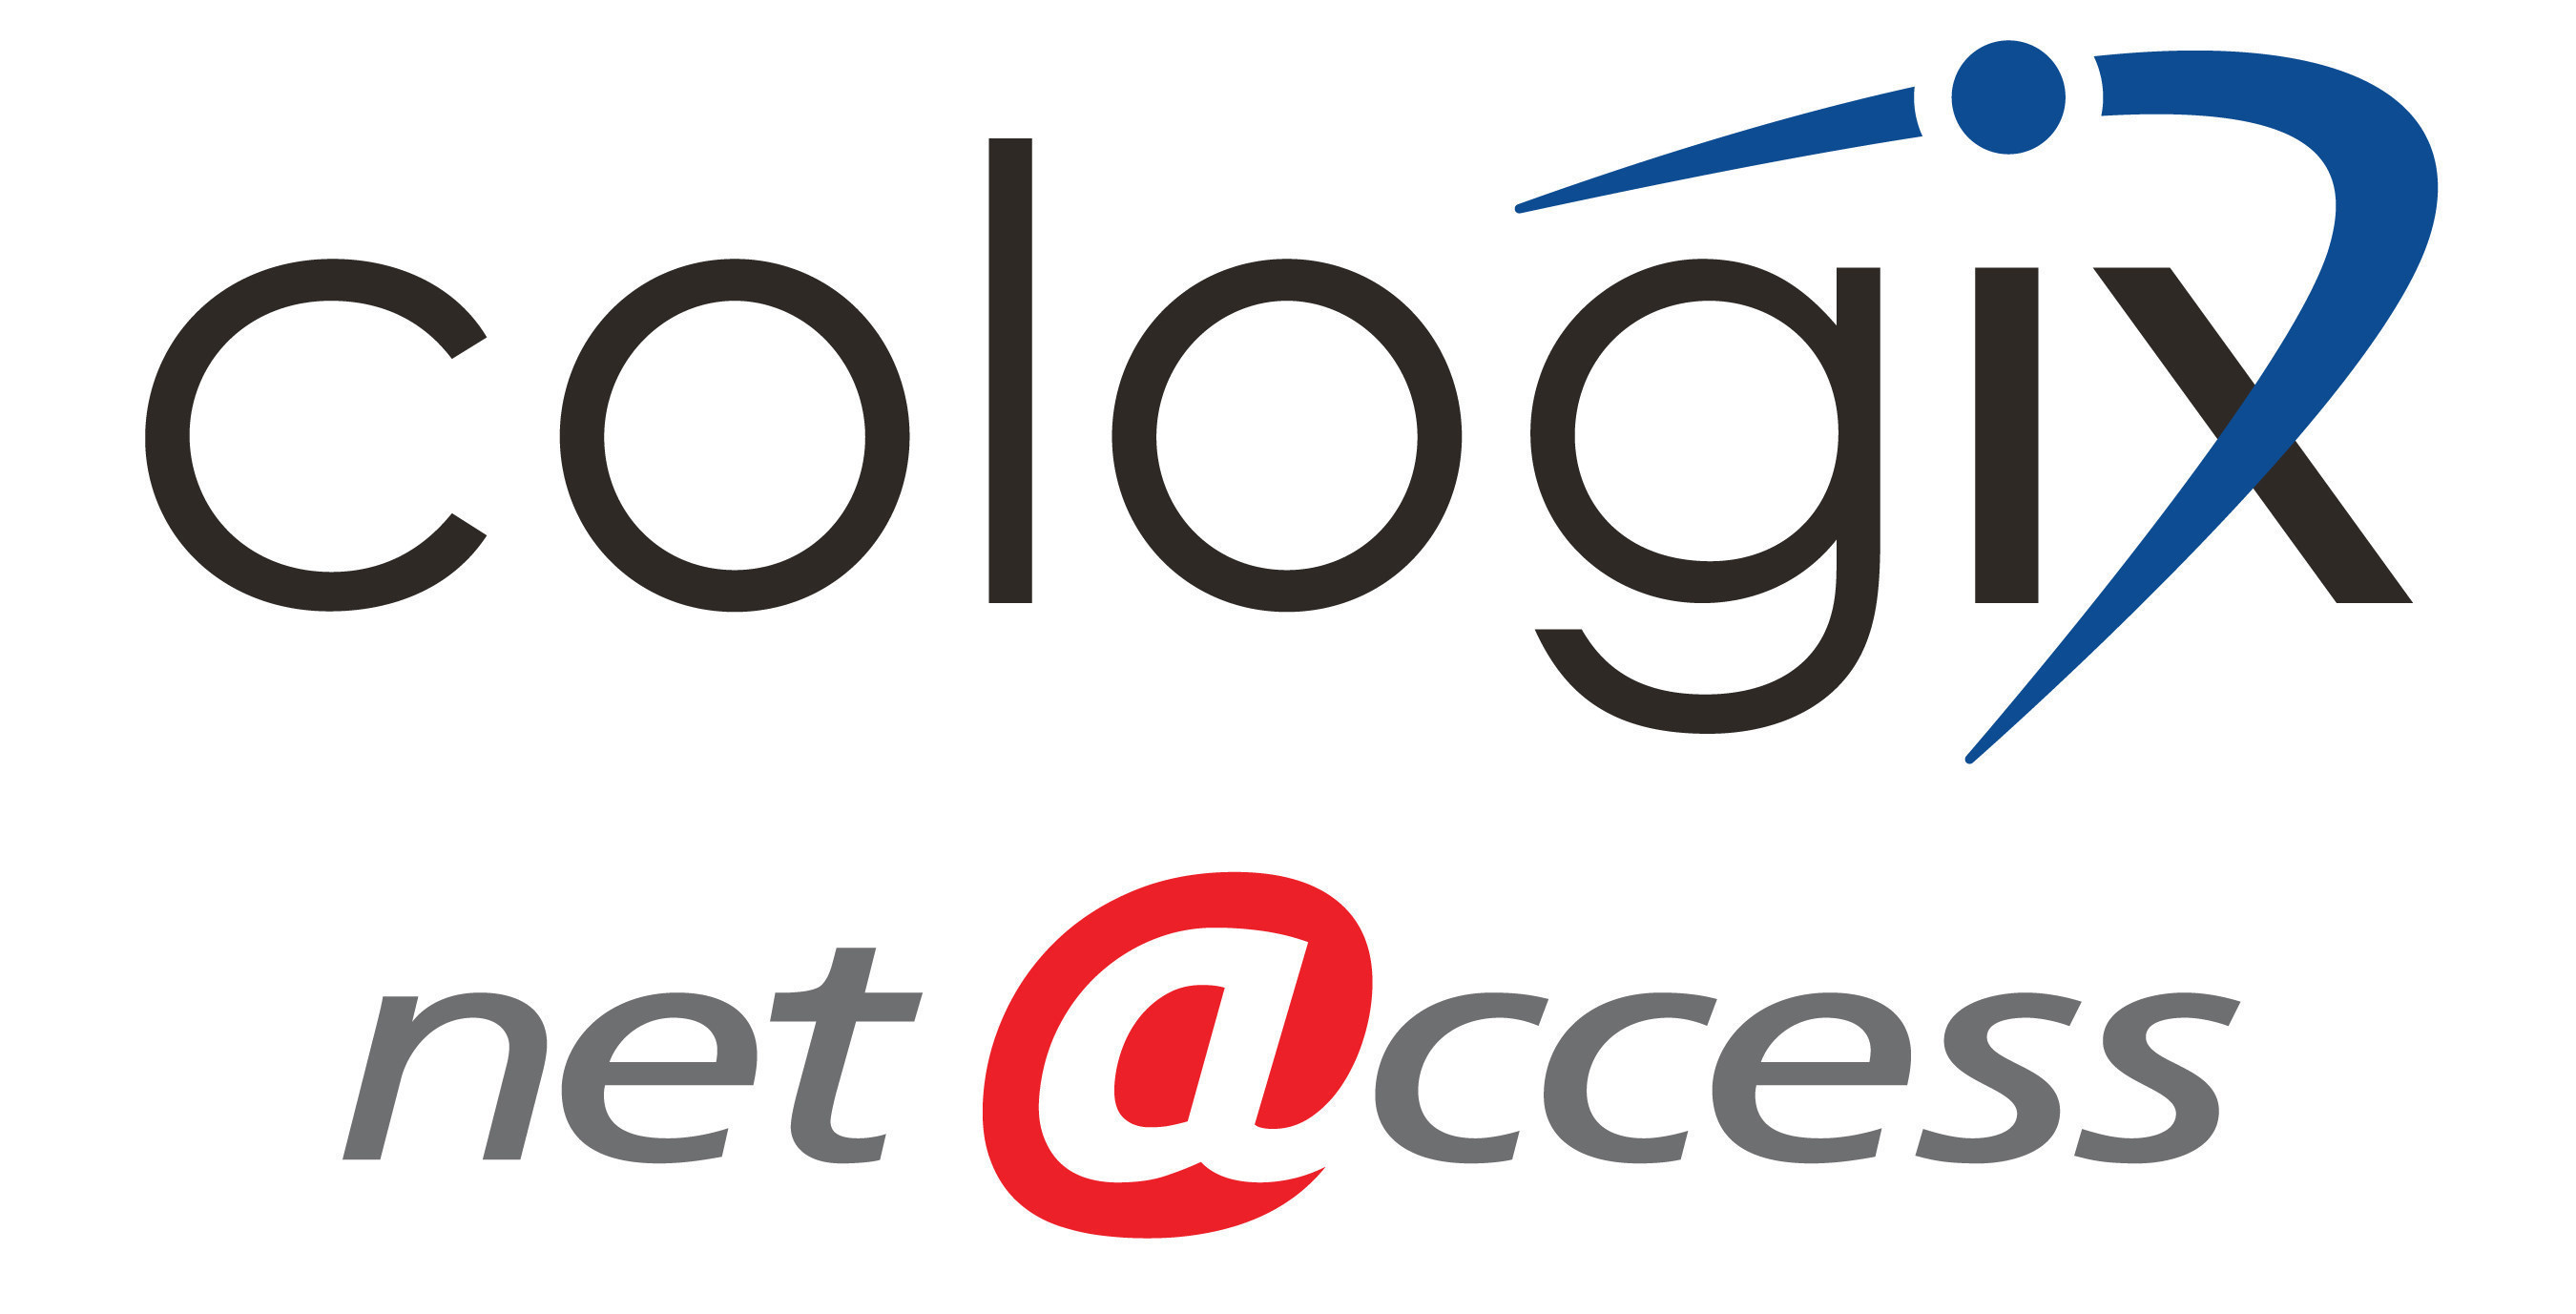 Cologix to acquire Net Access - Expanding their North American data center platform to Northern New Jersey.